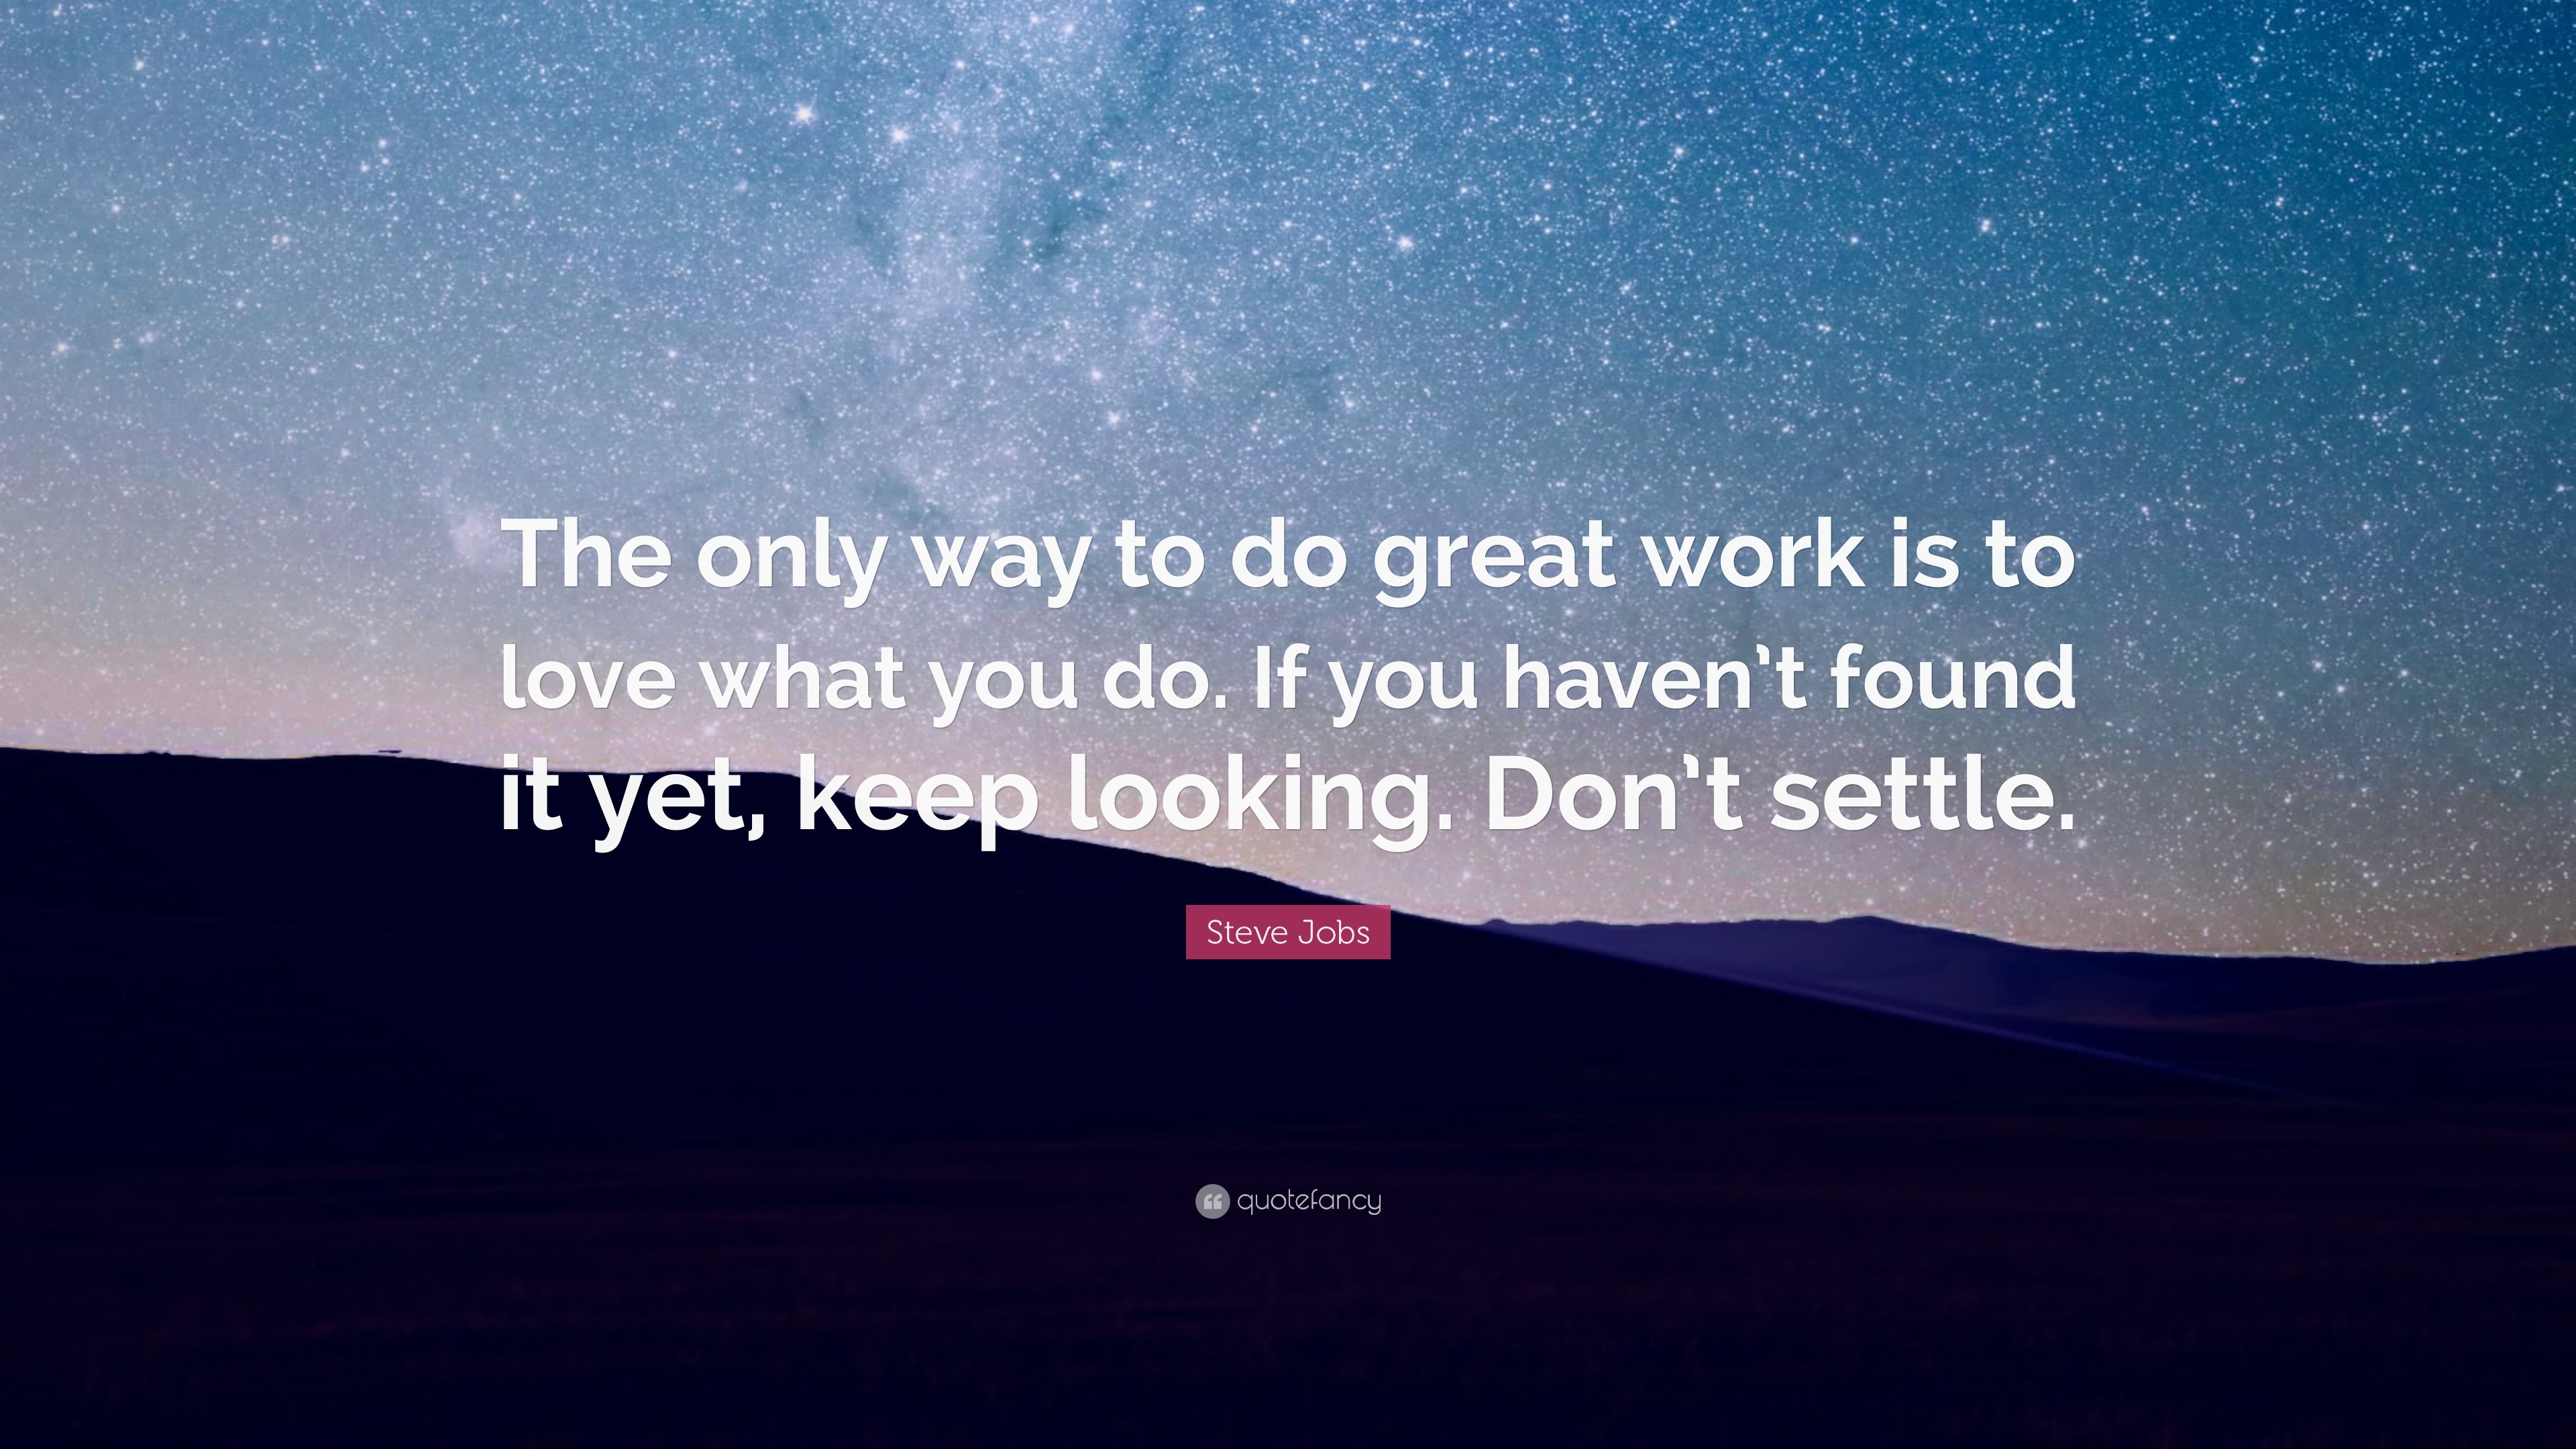 Steve Jobs Quote: “The only way to do great work is to love what you do